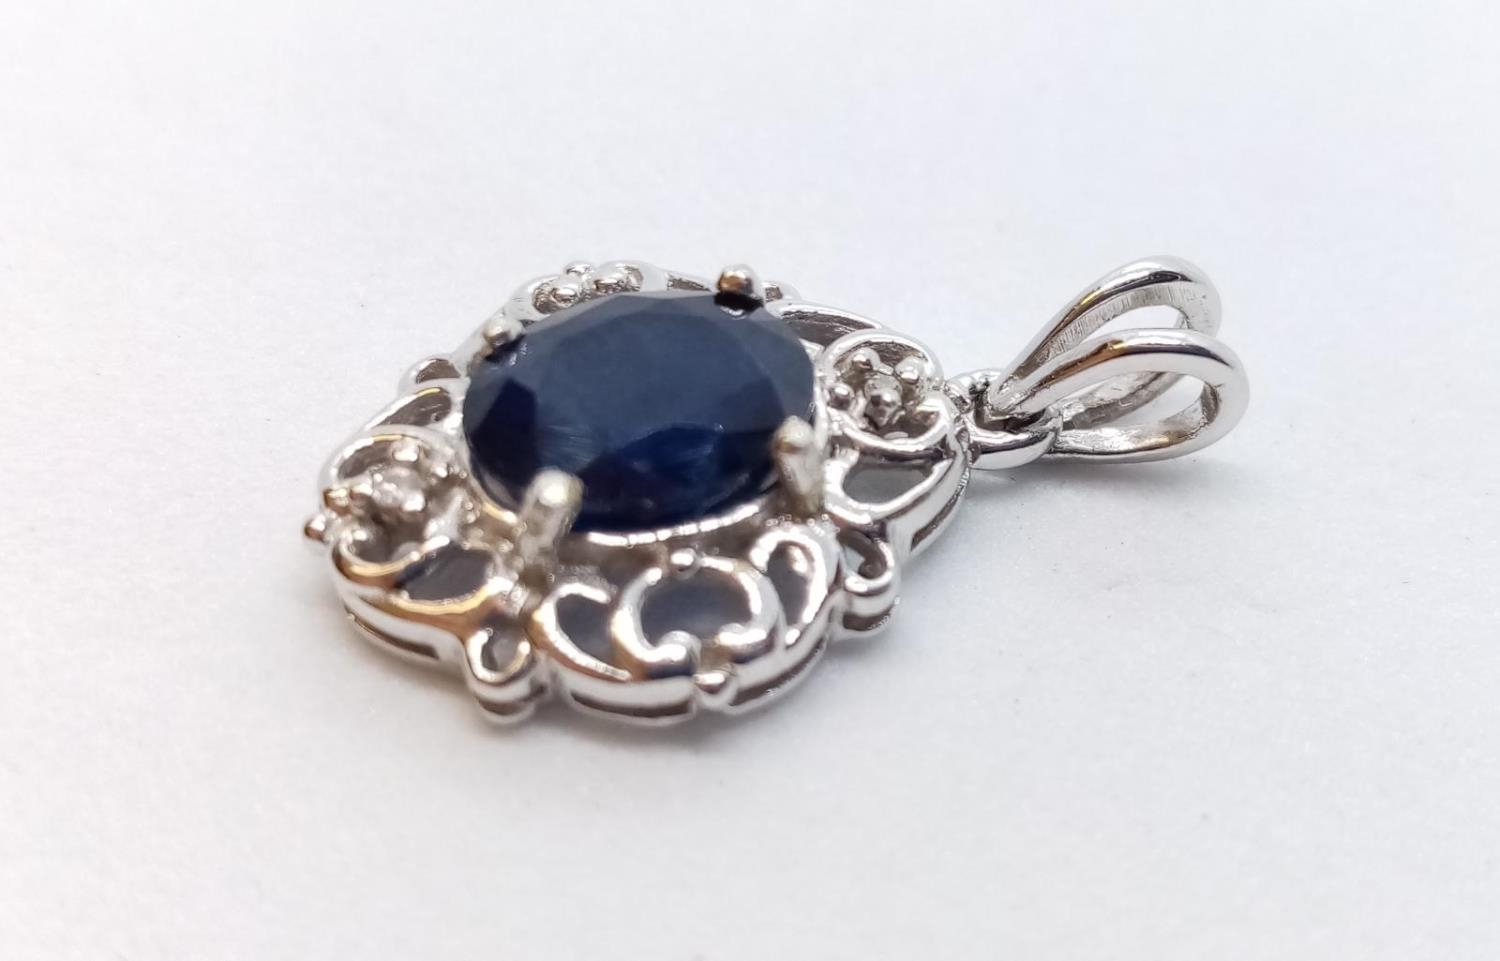 9ct White Gold Diamond and Sapphire PENDANT. 2.3g - Image 2 of 4